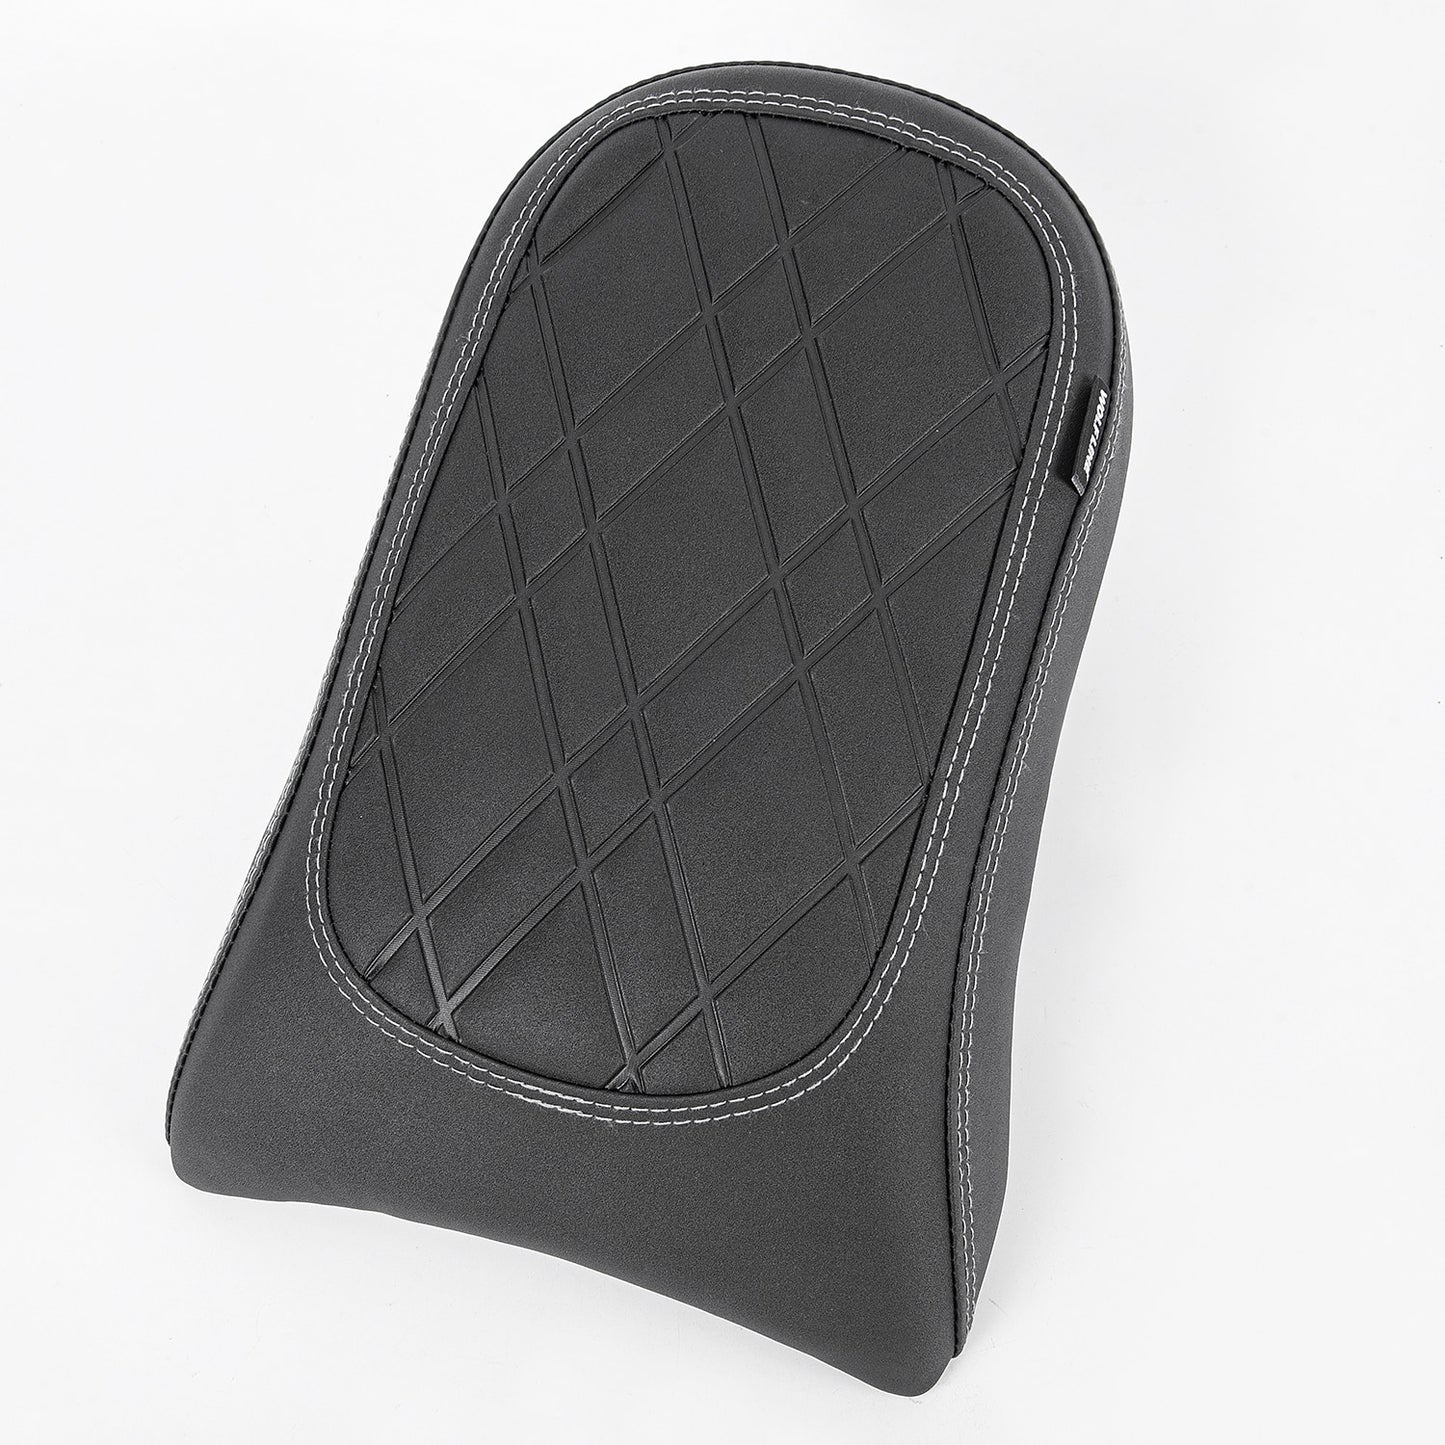 Wolfline R18 Rear Seat Cover for BMW R 18 2020 2021 2022 2023 Motorcycle Thicken Passenger Cushion Cover Accessories